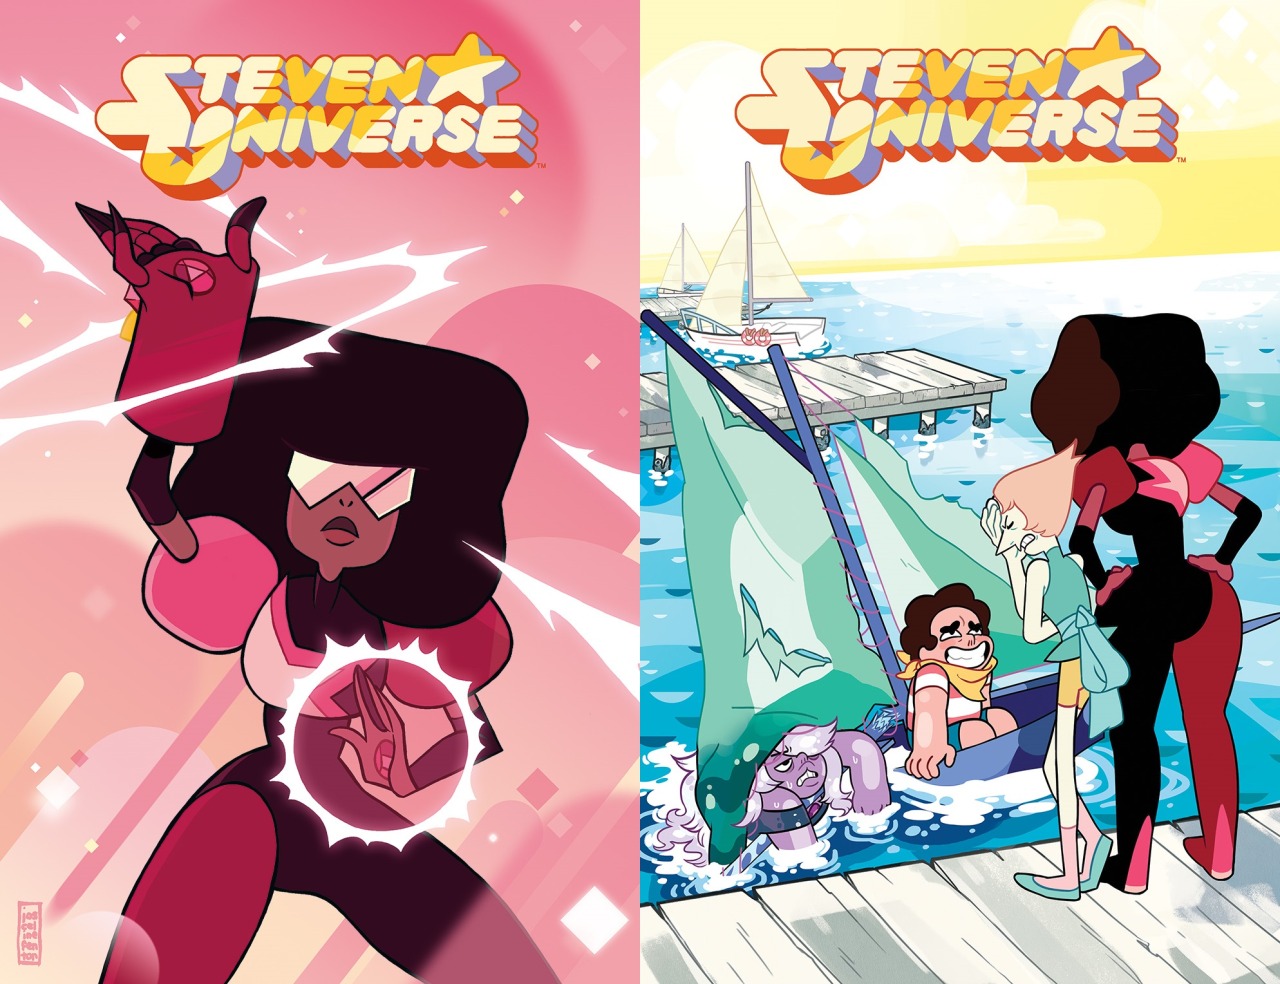 as-warm-as-choco:  STEVEN UNIVERSE Comics’ Covers (pt.2) : Illustrated by: Stu